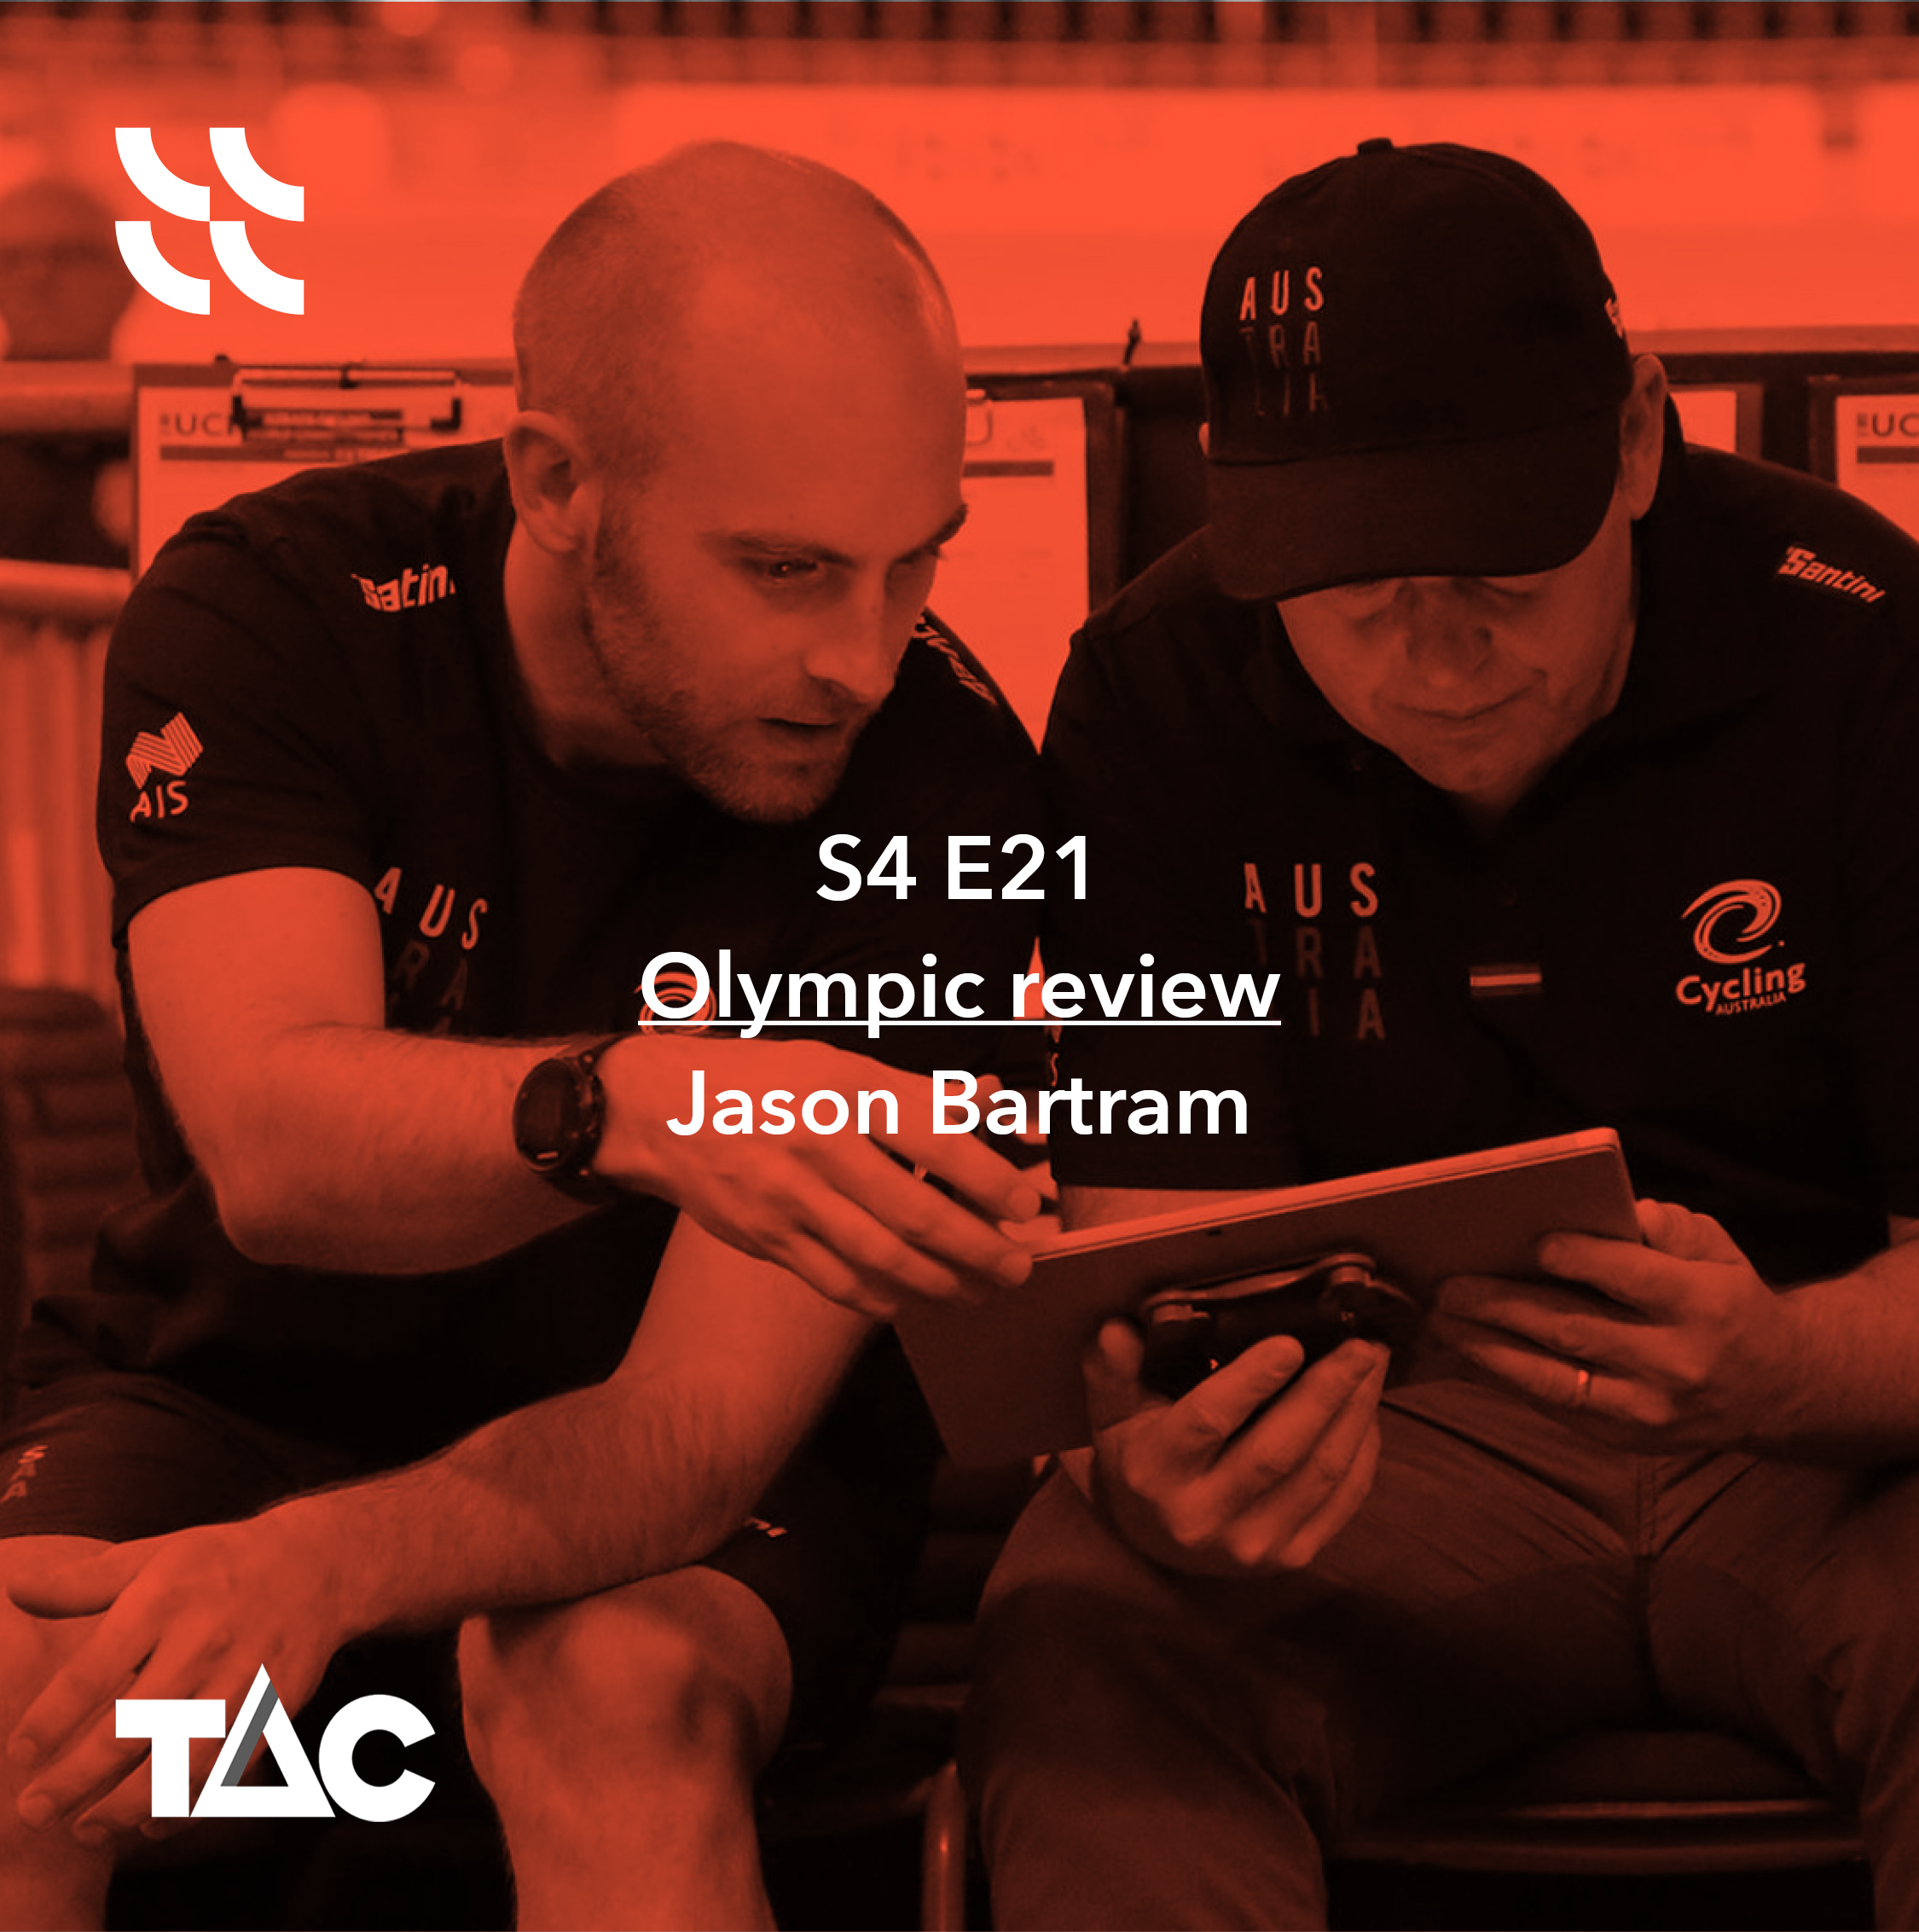 Olympic review | Jason Bartram